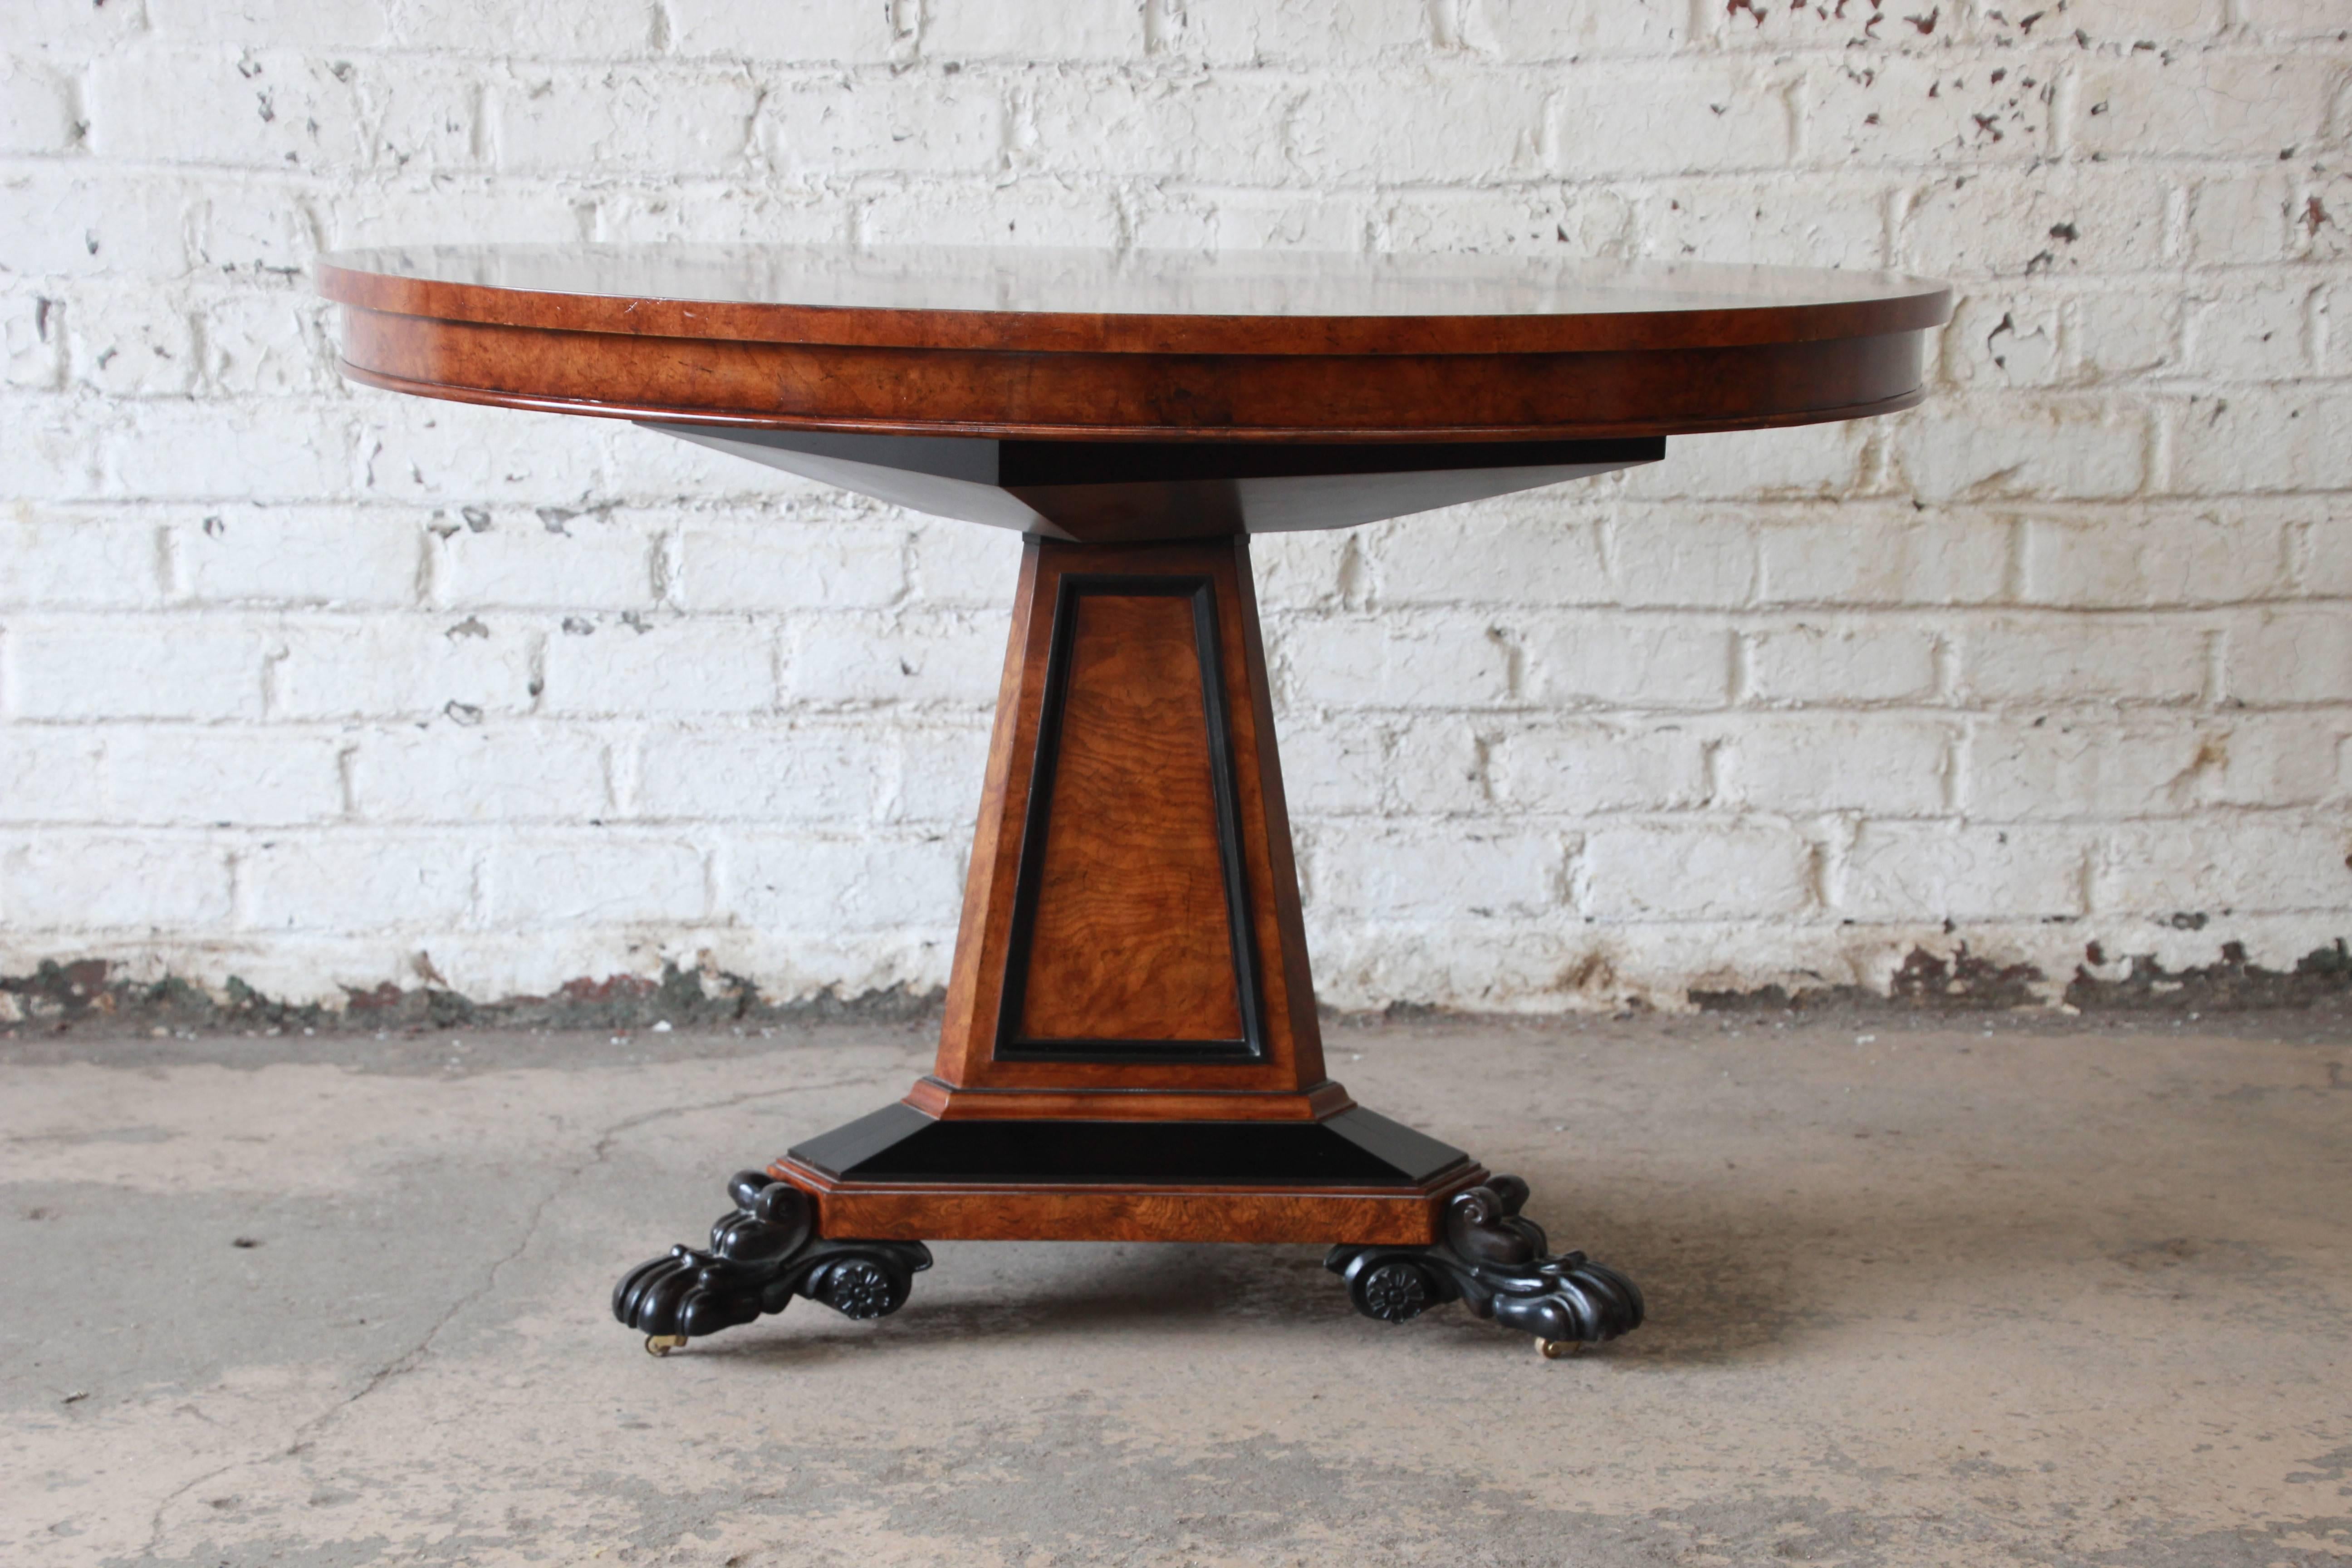 The Regency centre table, a rare piece, was designed in circular burl ash by George Bullock for Baker Furniture's Stately Homes collection. Adorning the inlaid top is a broad border of ebonized floral vines within ebonized bands. The frieze follows